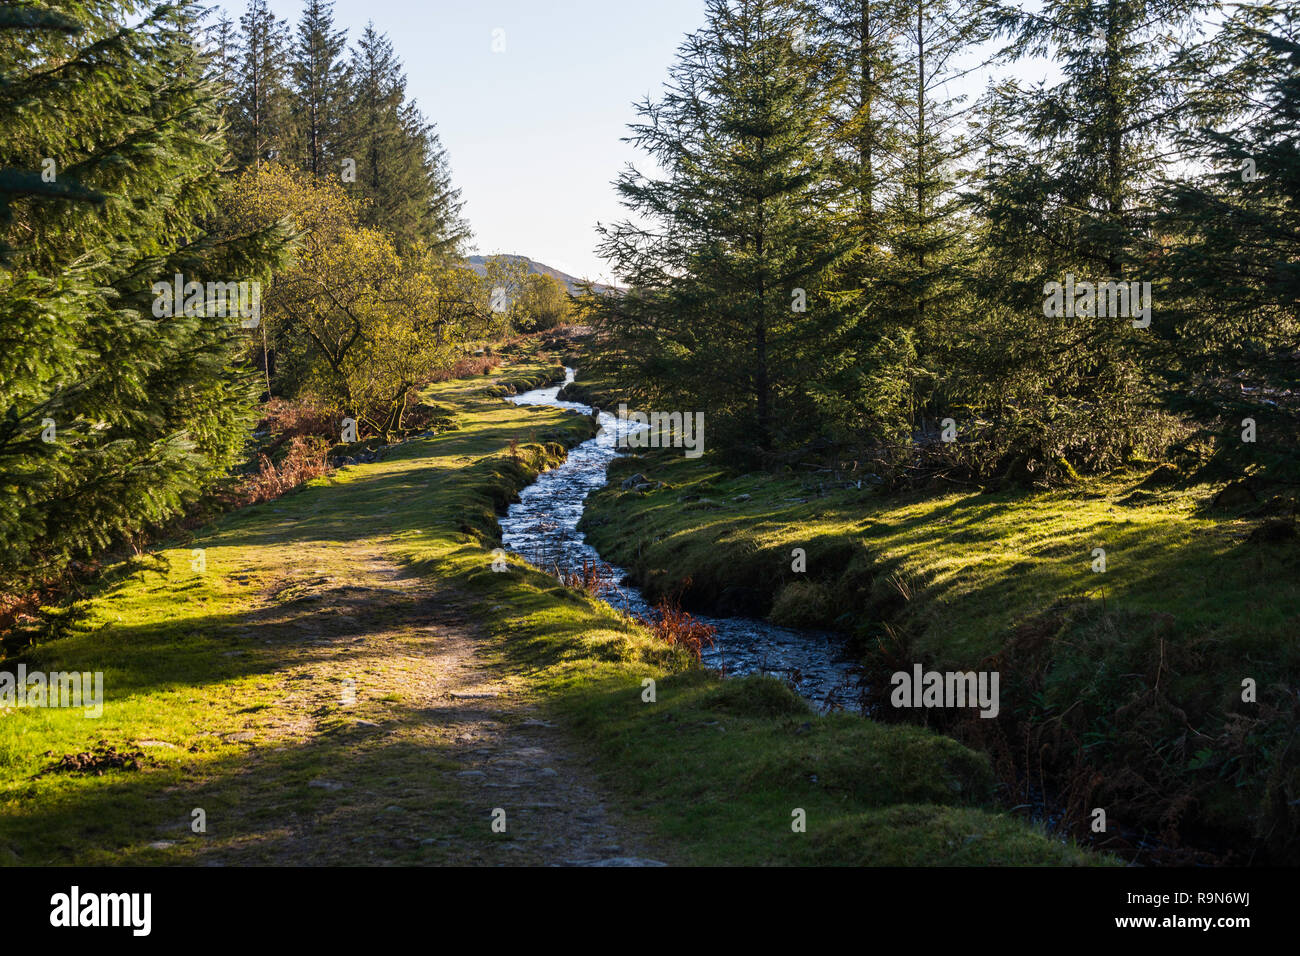 The Devonport Leat passes through Stanlake Plantaiton.  It was built in the 1790s to carry fresh water from Dartmoor to the Dockyards of Plymouth. Stock Photo